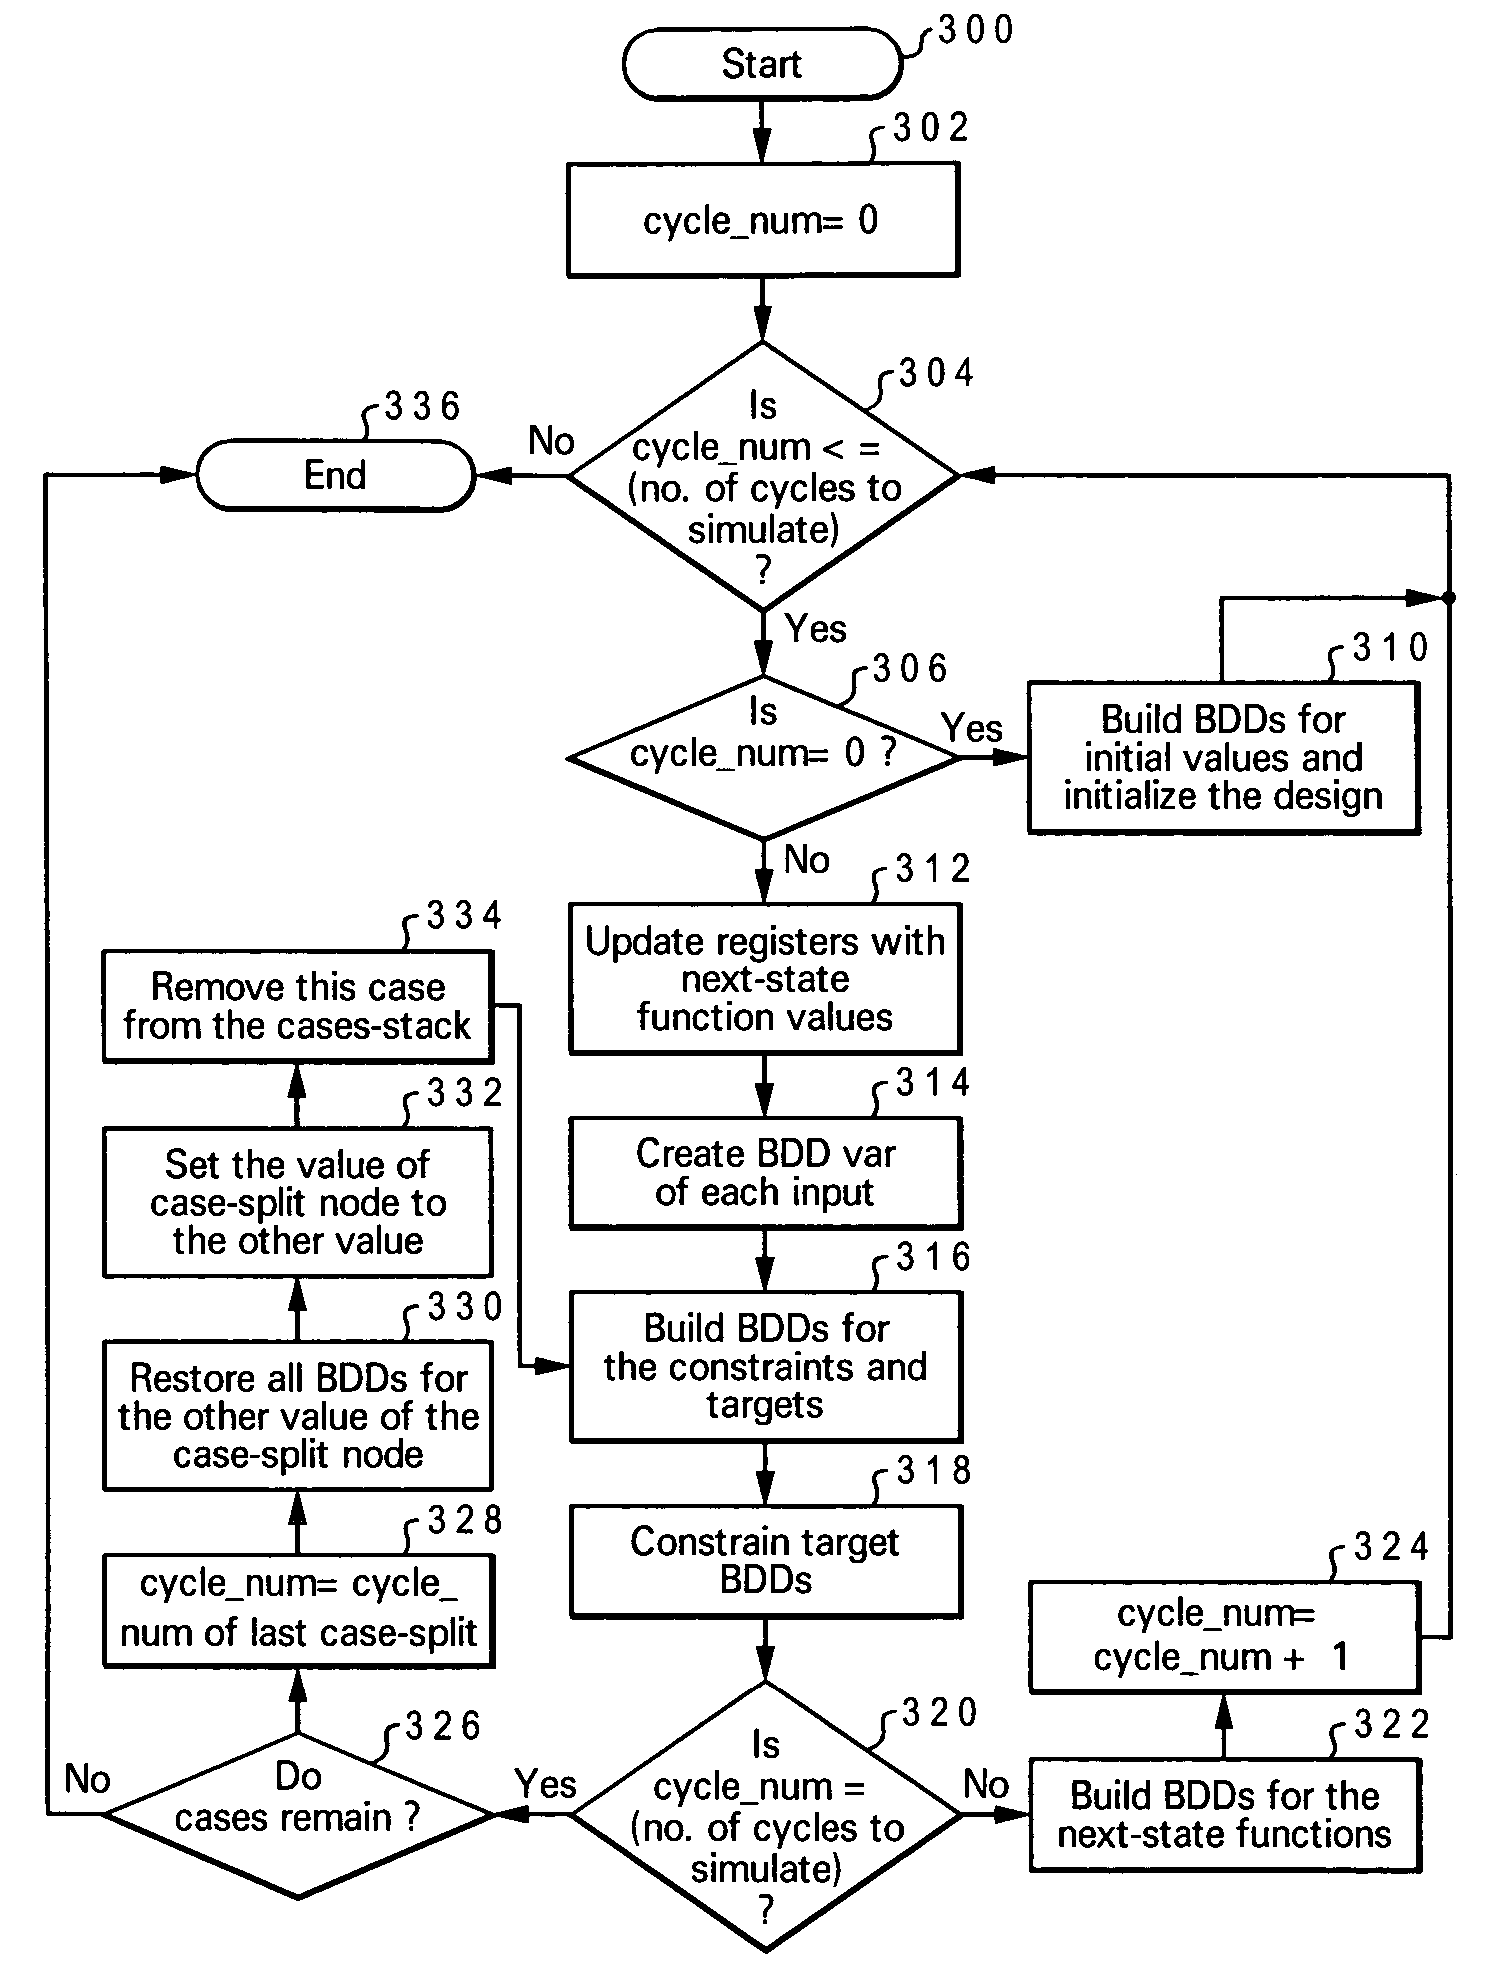 Method and system for optimized automated case-splitting via constraints in a symbolic simulation framework